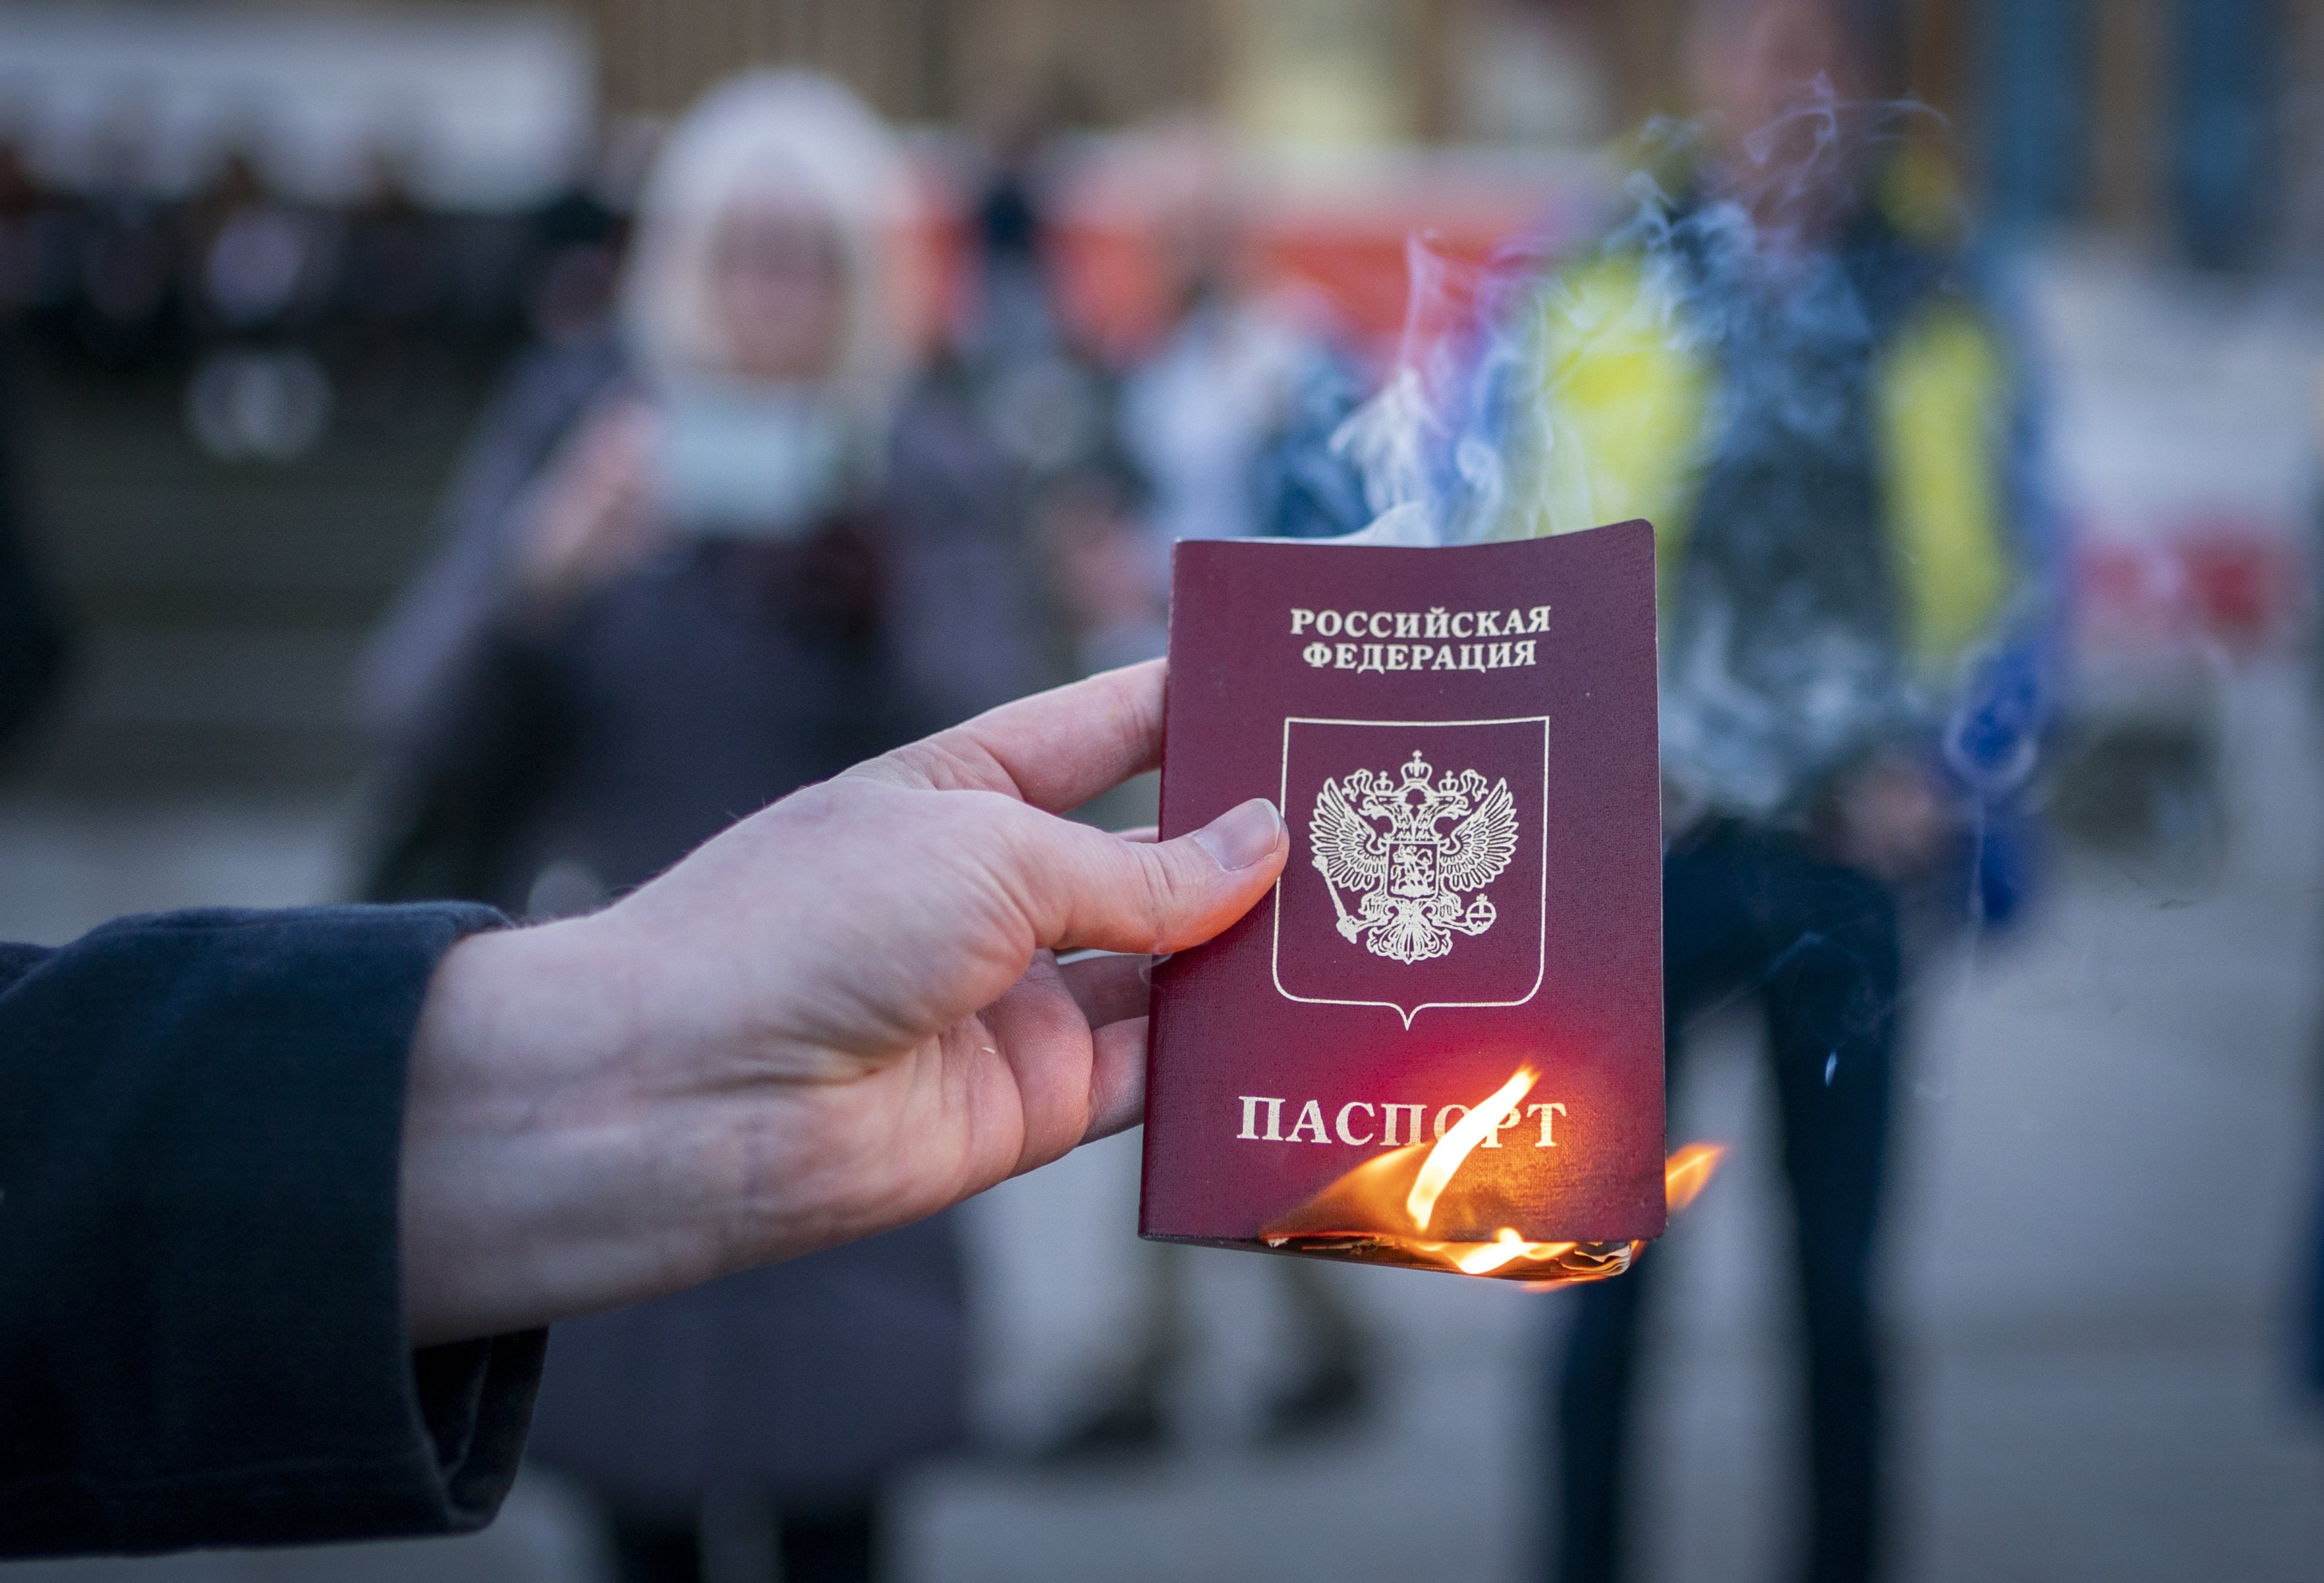 Anna Jakubova sets fire to her Russian passport during the Standing In Solidarity With Ukraine vigil on The Mound, Edinburgh, following the Russian invasion of Ukraine (Jane Barlow/PA)